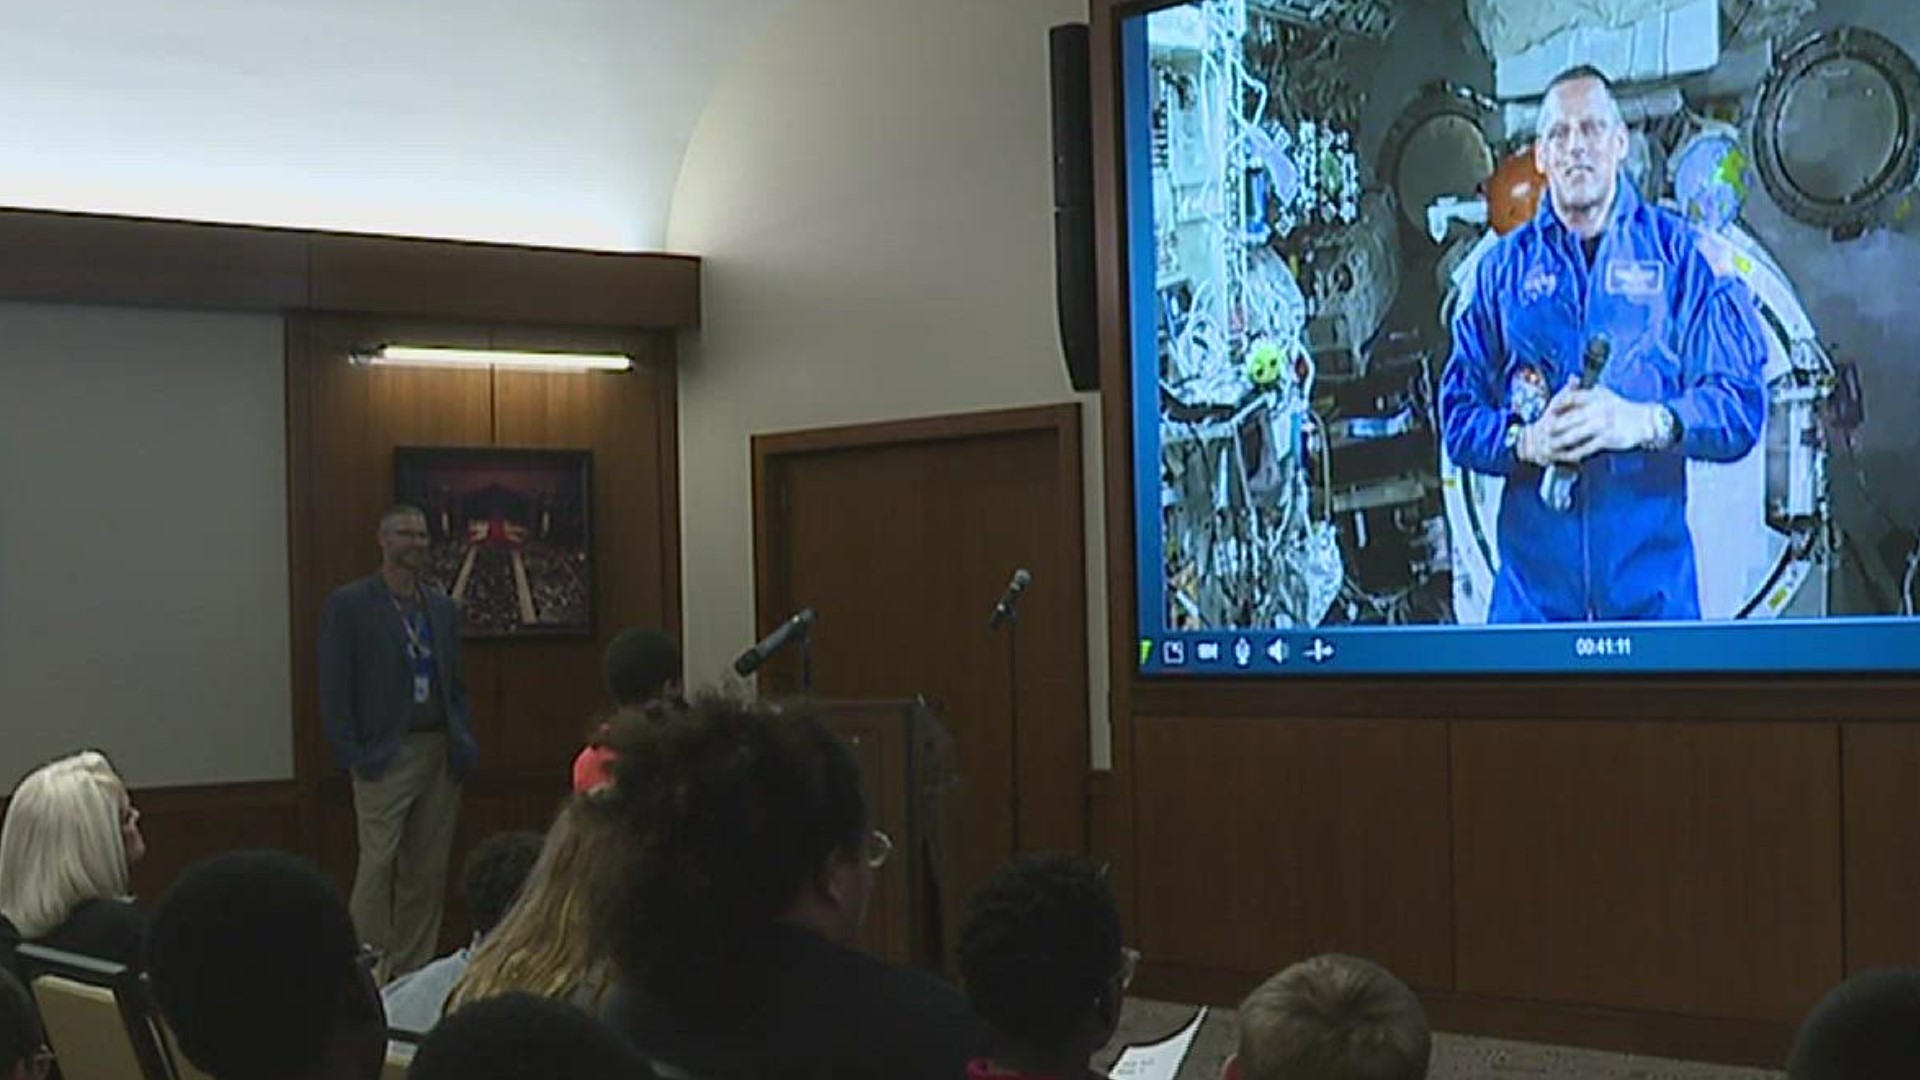 Bob Hines, who is currently on board the International Space Station, spoke with students at Milton Hershey School in Dauphin County via a live feed.